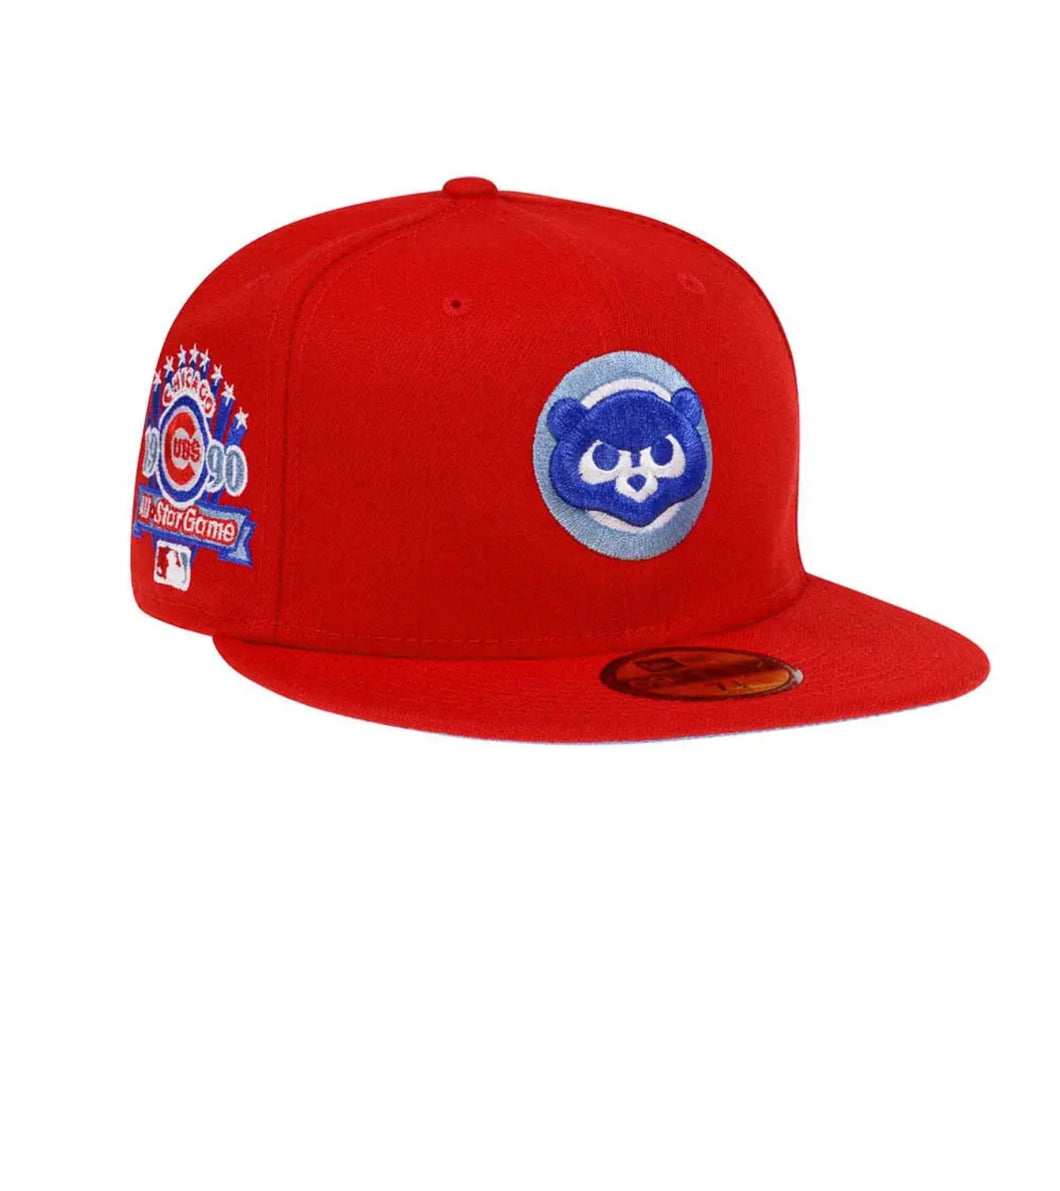 NEW ERA CHICAGO CUBS ALL STAR GAME 1990 RED GLACIER BLUE EDITION 59FIFTY FITTED CAP